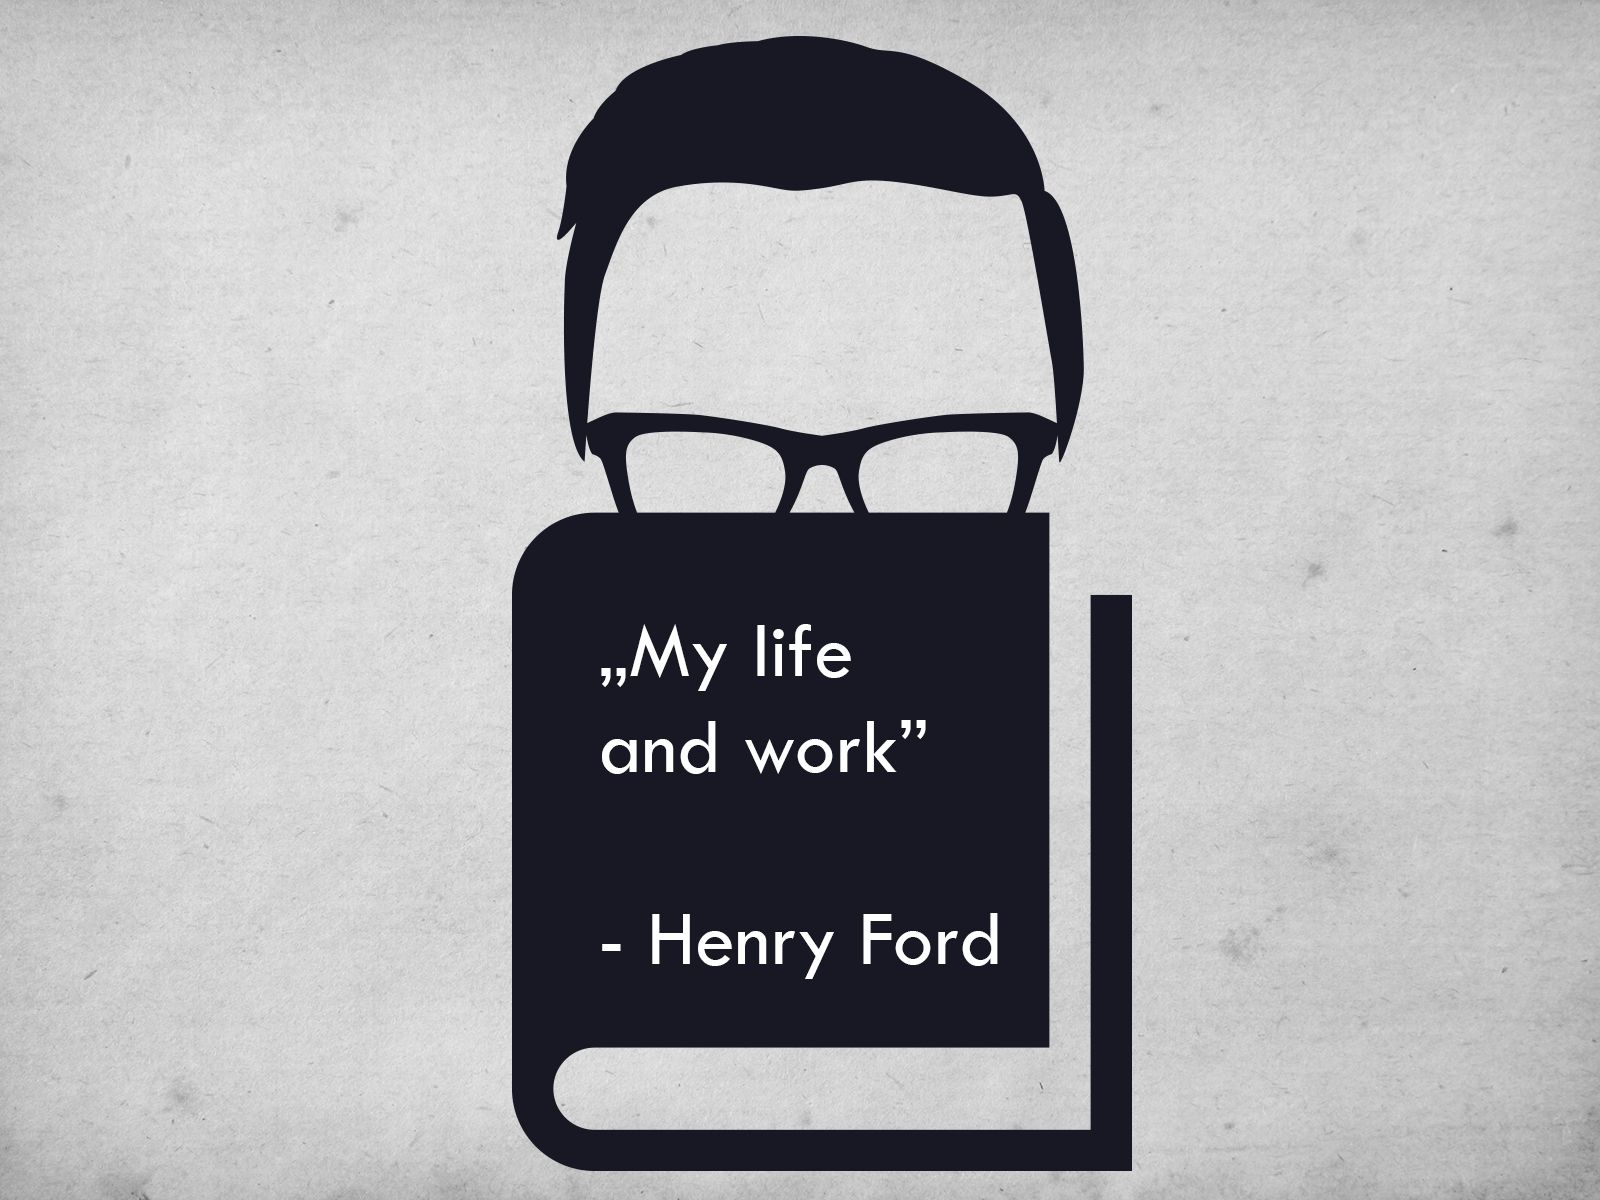 h ford my lfe and work.jpg